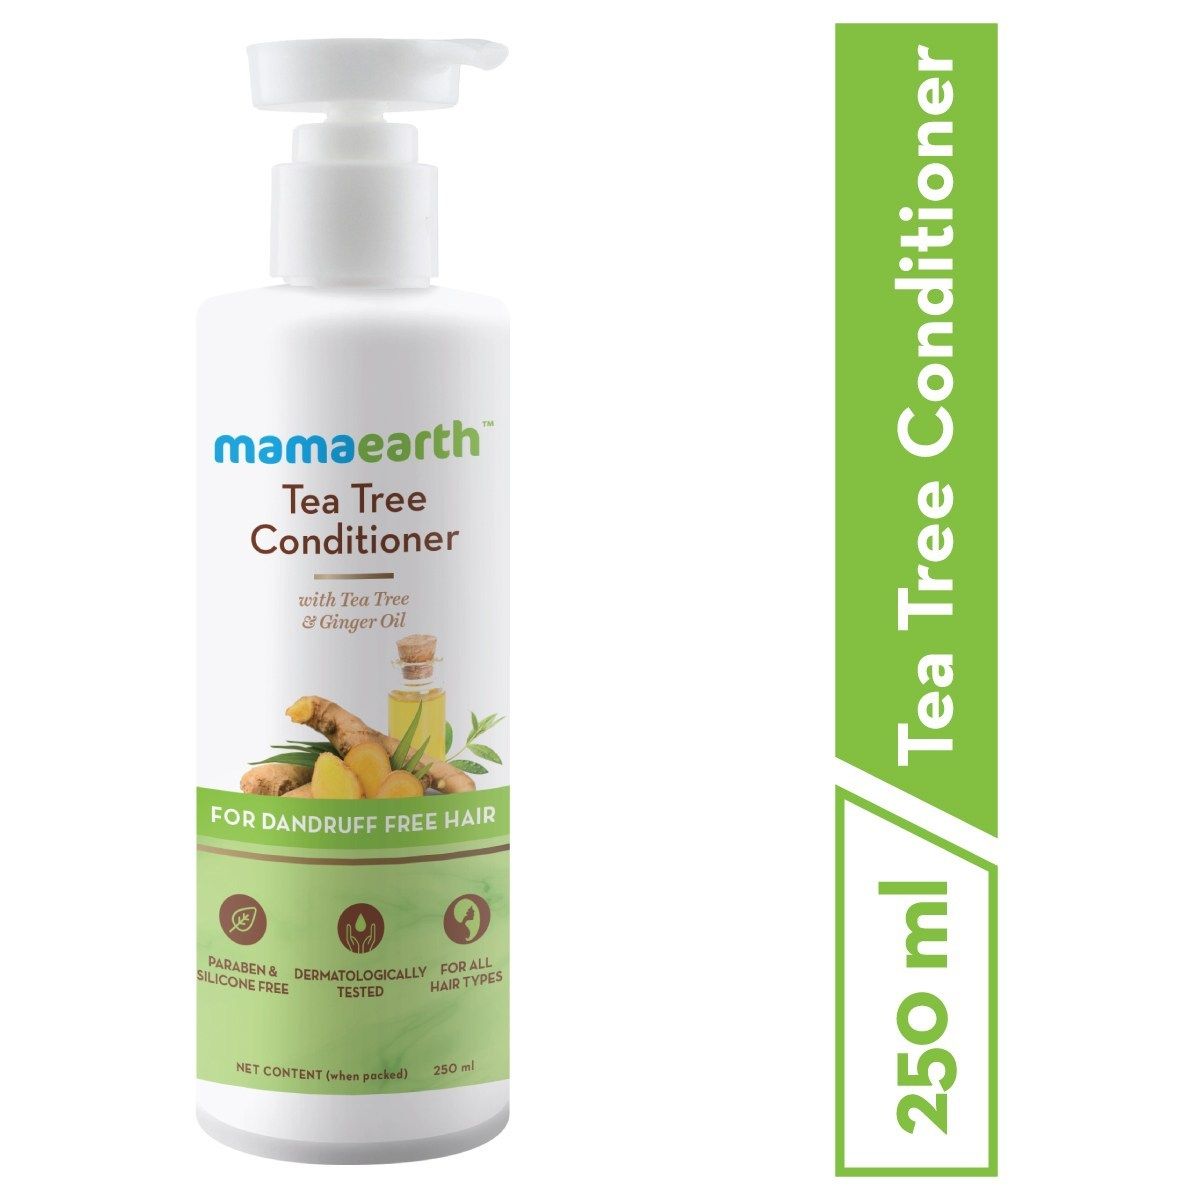 Mamaearth Tea Tree Conditioner With Tea Tree & Ginger Oil Better Than Others Available in the Market